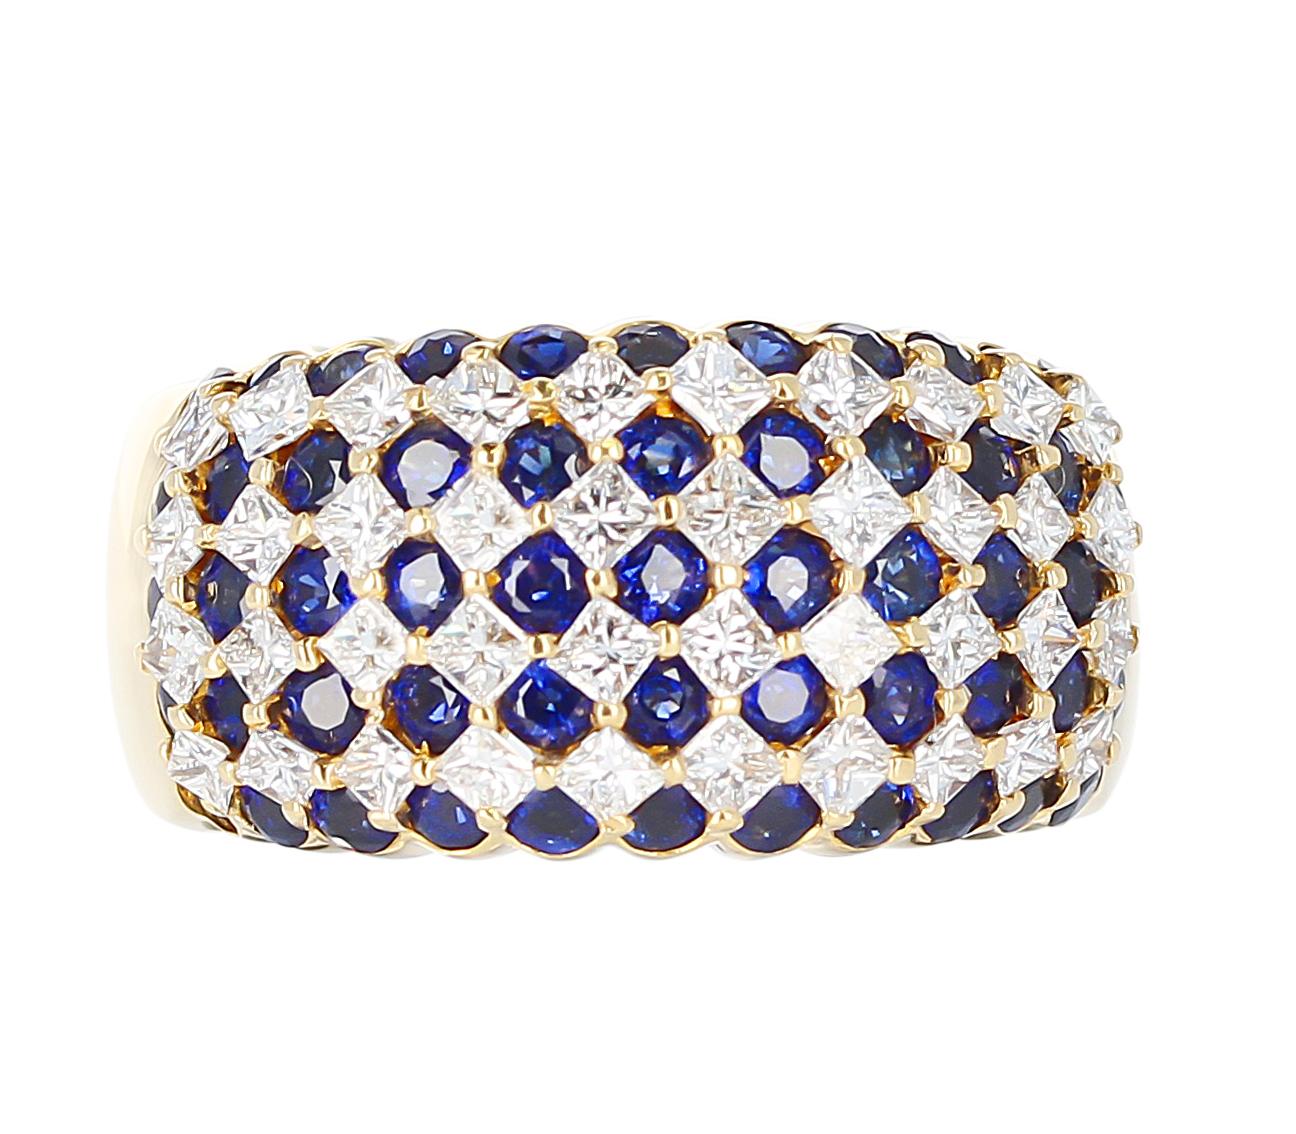 A nine row sapphire and diamond cocktail ring in 18 Karat Yellow Gold. The sapphires weigh 3.72 carats, and the diamonds weigh 1.67 carats. The total weight is 16.47 grams, Ring Size US 8.25.  